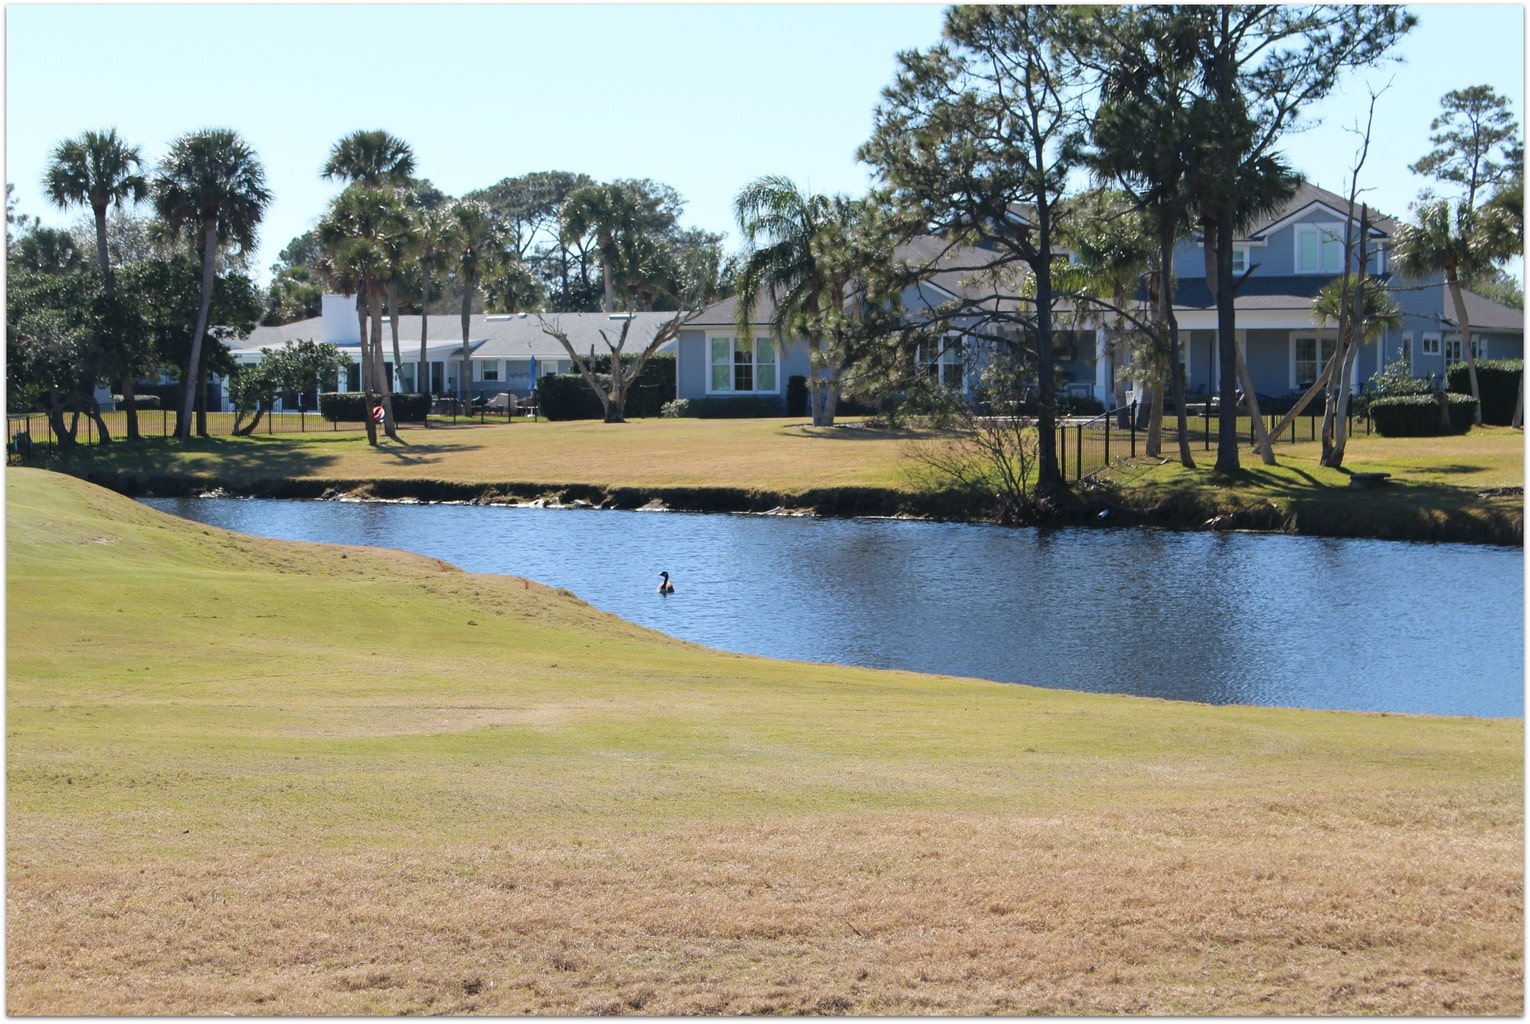 Looking for a luxurious hotel in Ponte Vedra? You've found it at the Ponte Vedra Inn & Club!